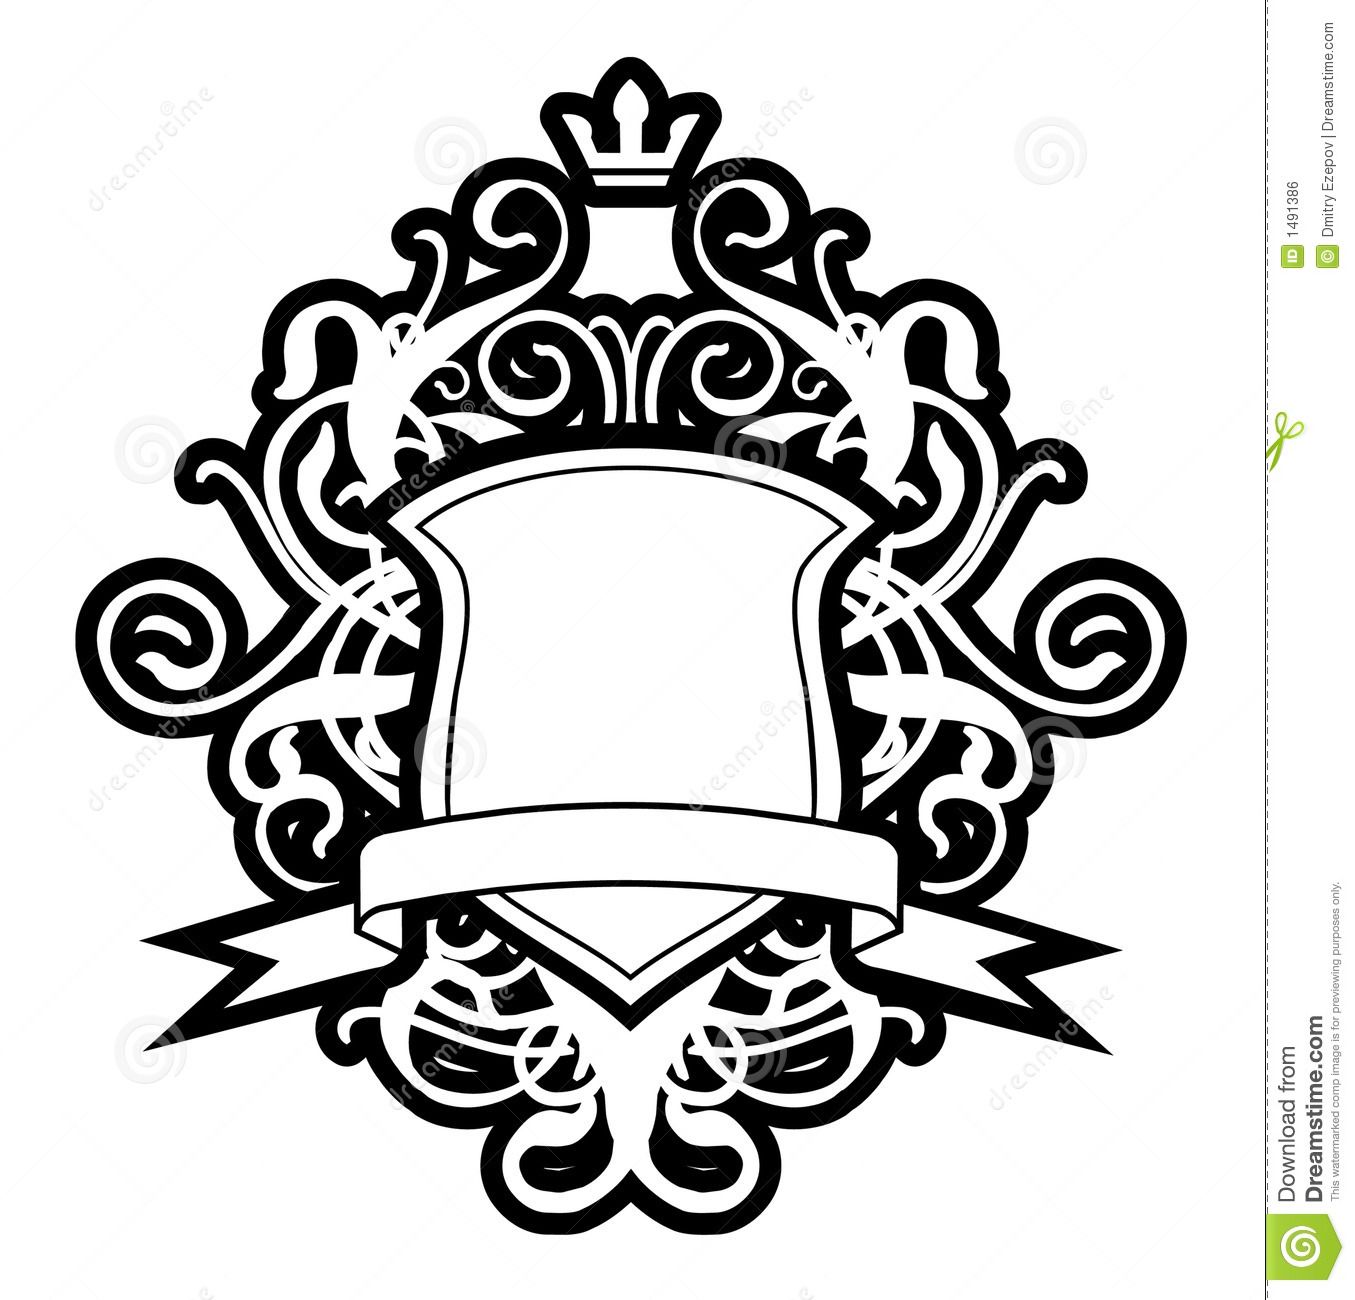 Coat Of Arms Royalty Free Stock Image